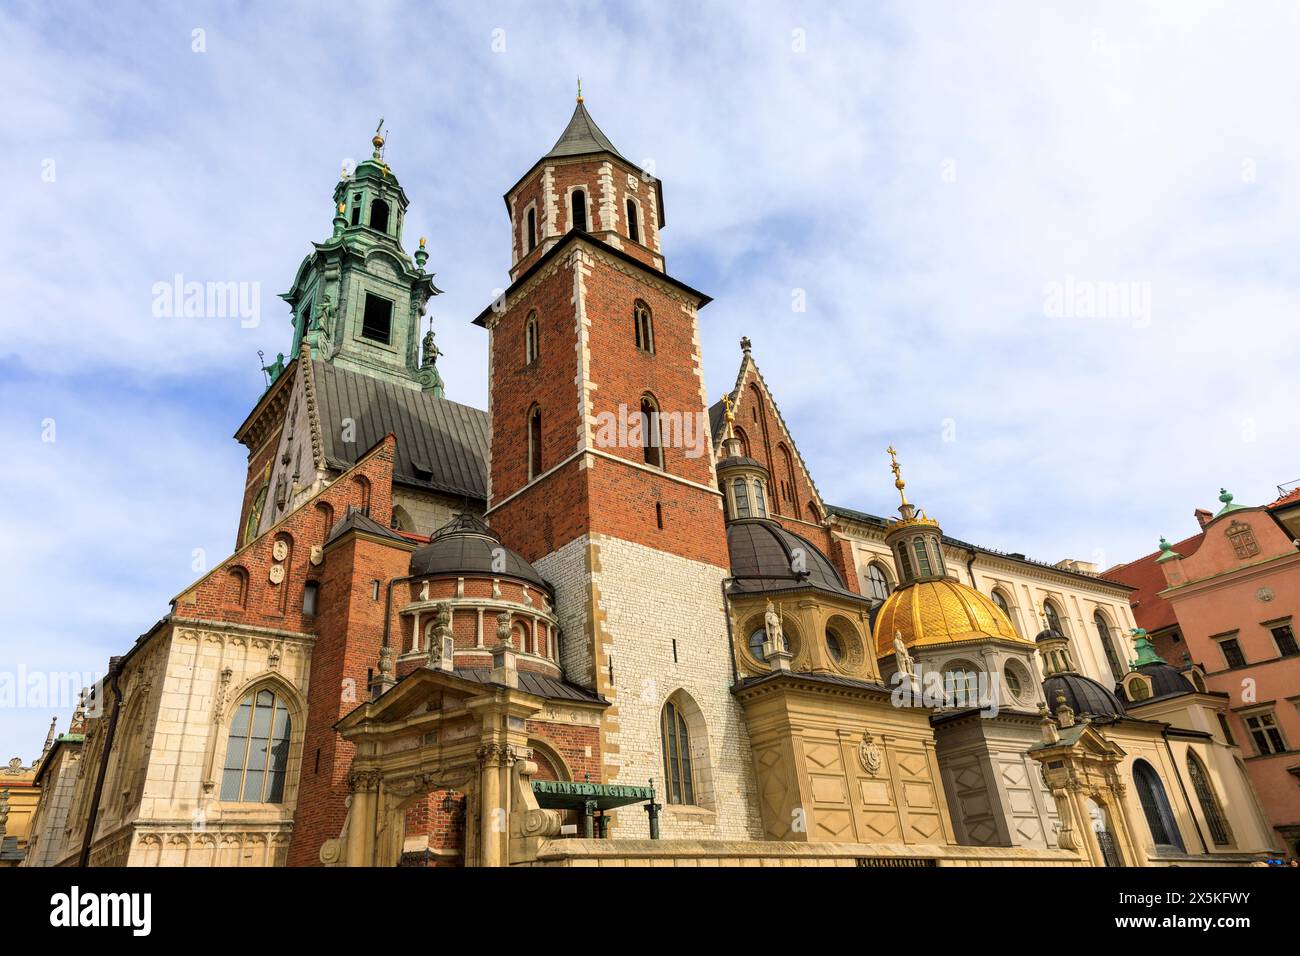 Poland, Krakow. The Wawel Castle. Structures representing medieval, renaissance and baroque periods. UNESCO World Heritage Site. Stock Photo